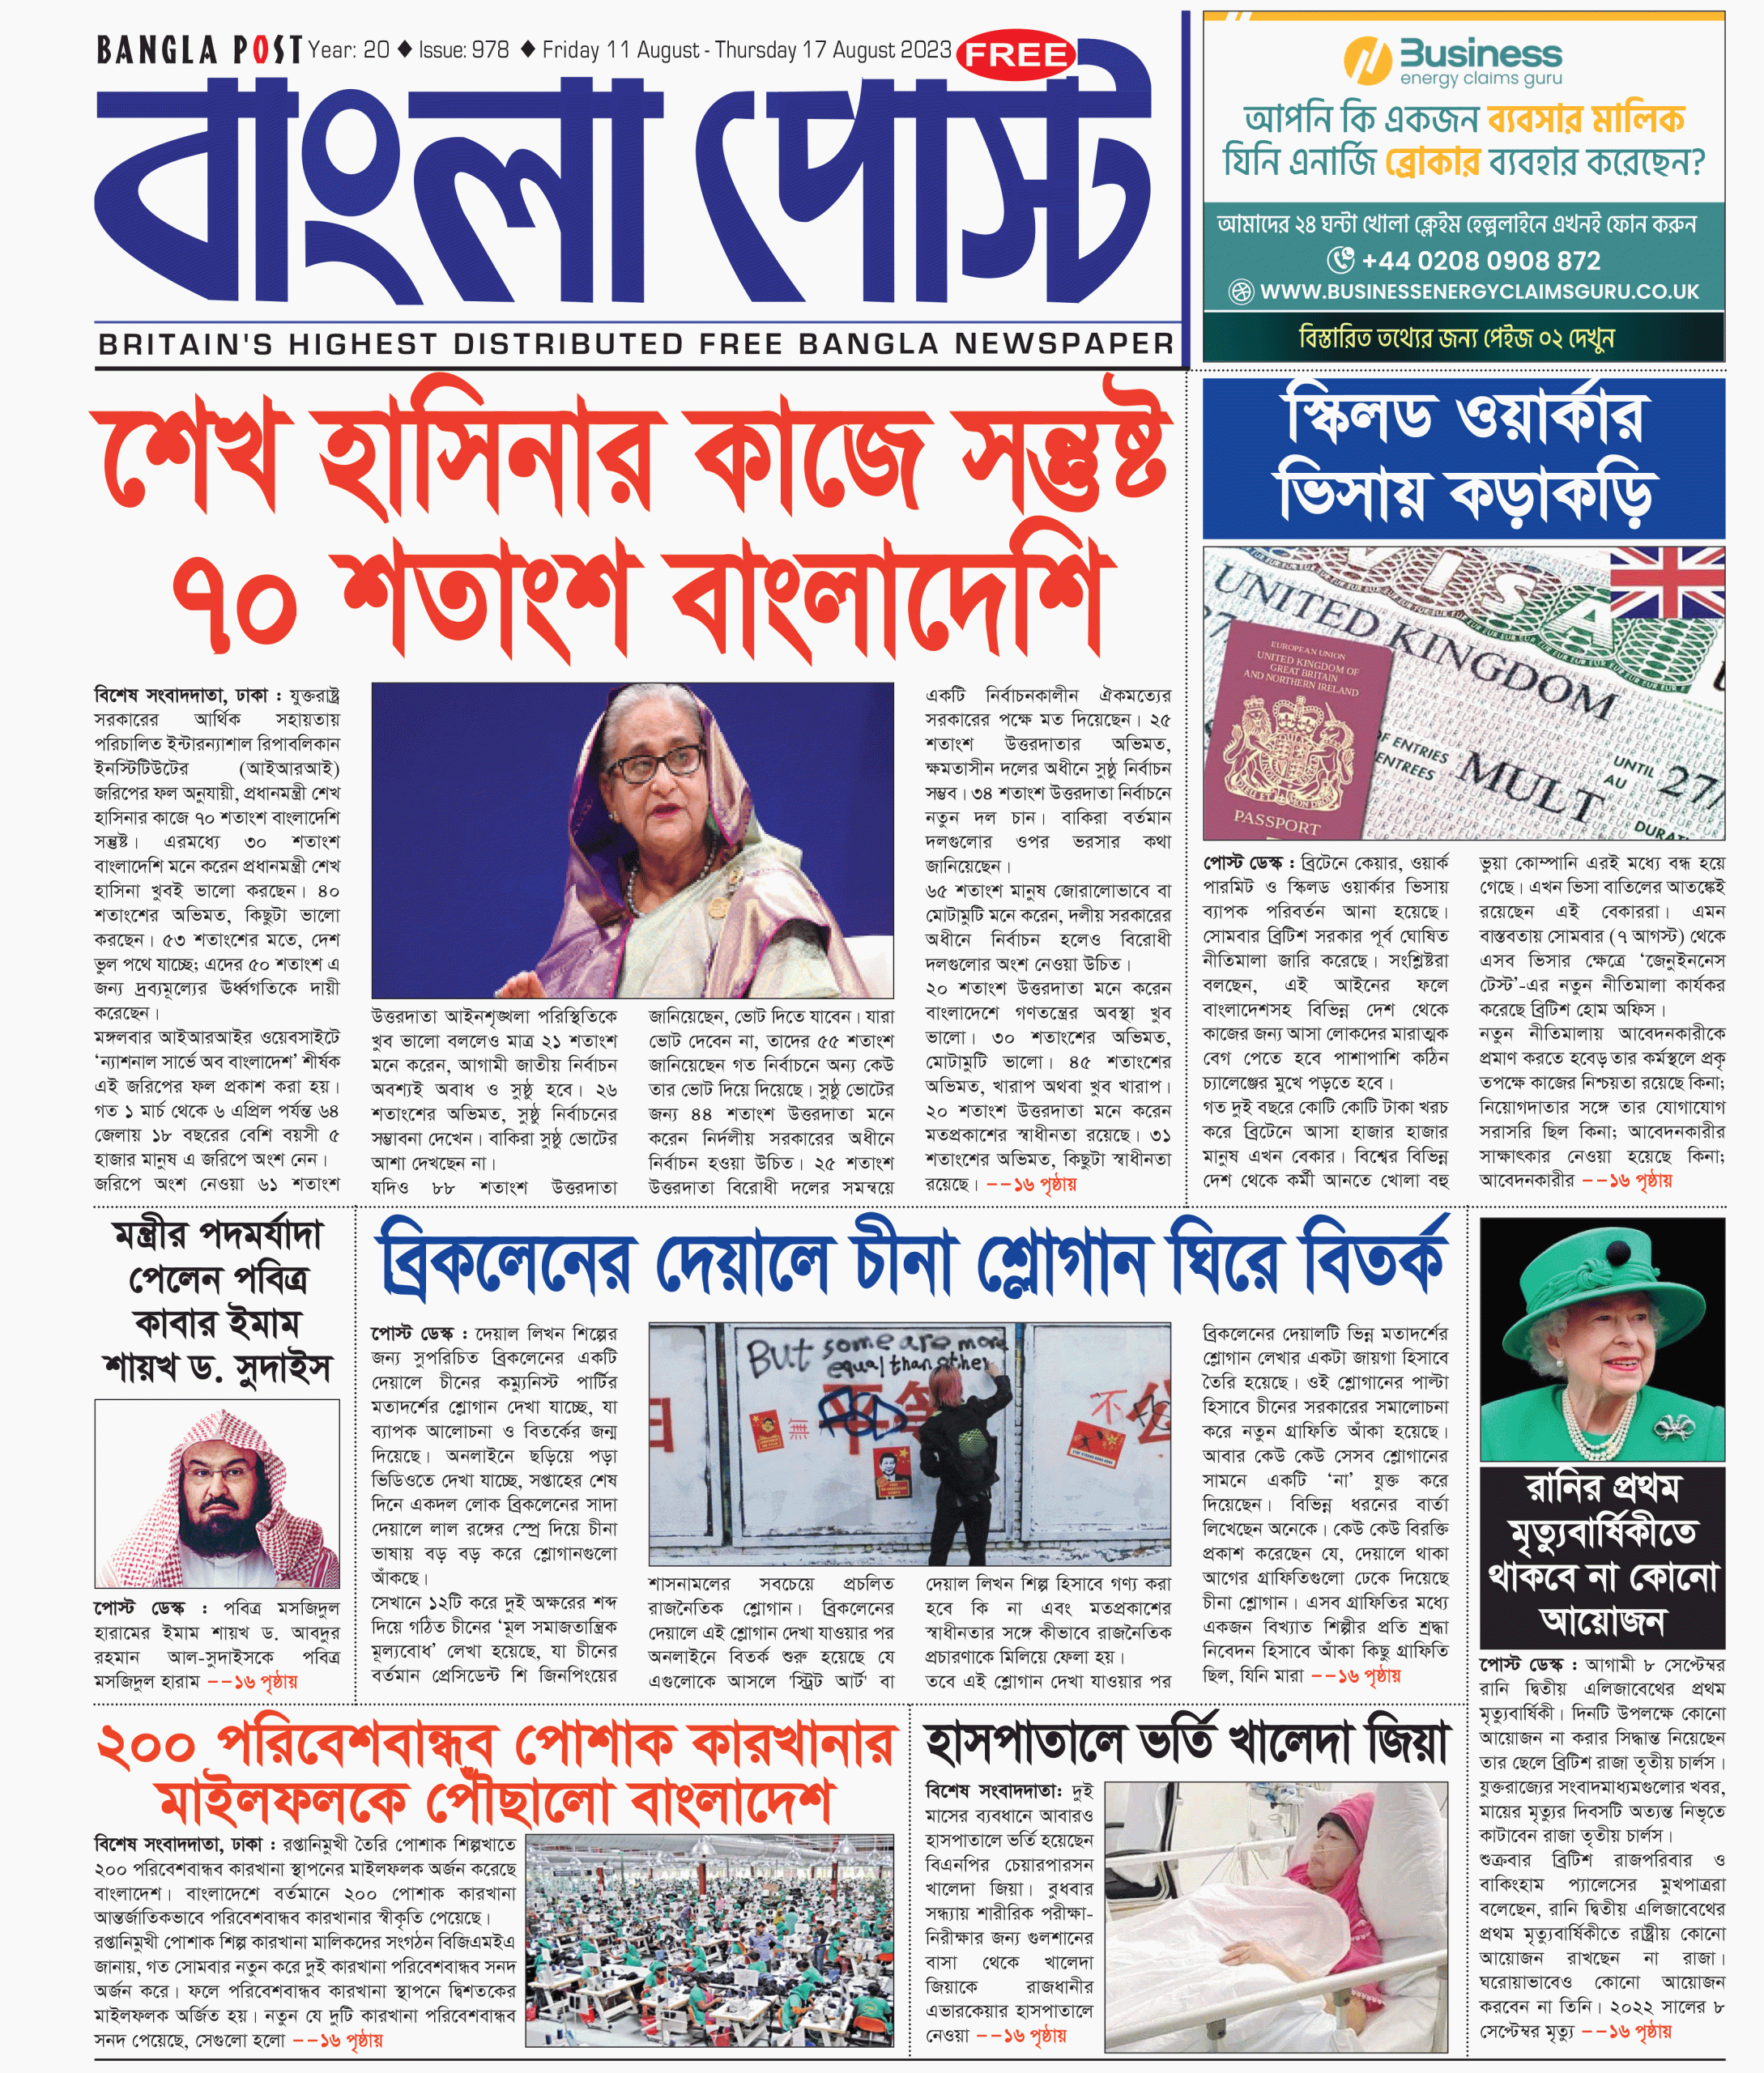 Bangla Post Issue – 978 | 11 August 2023